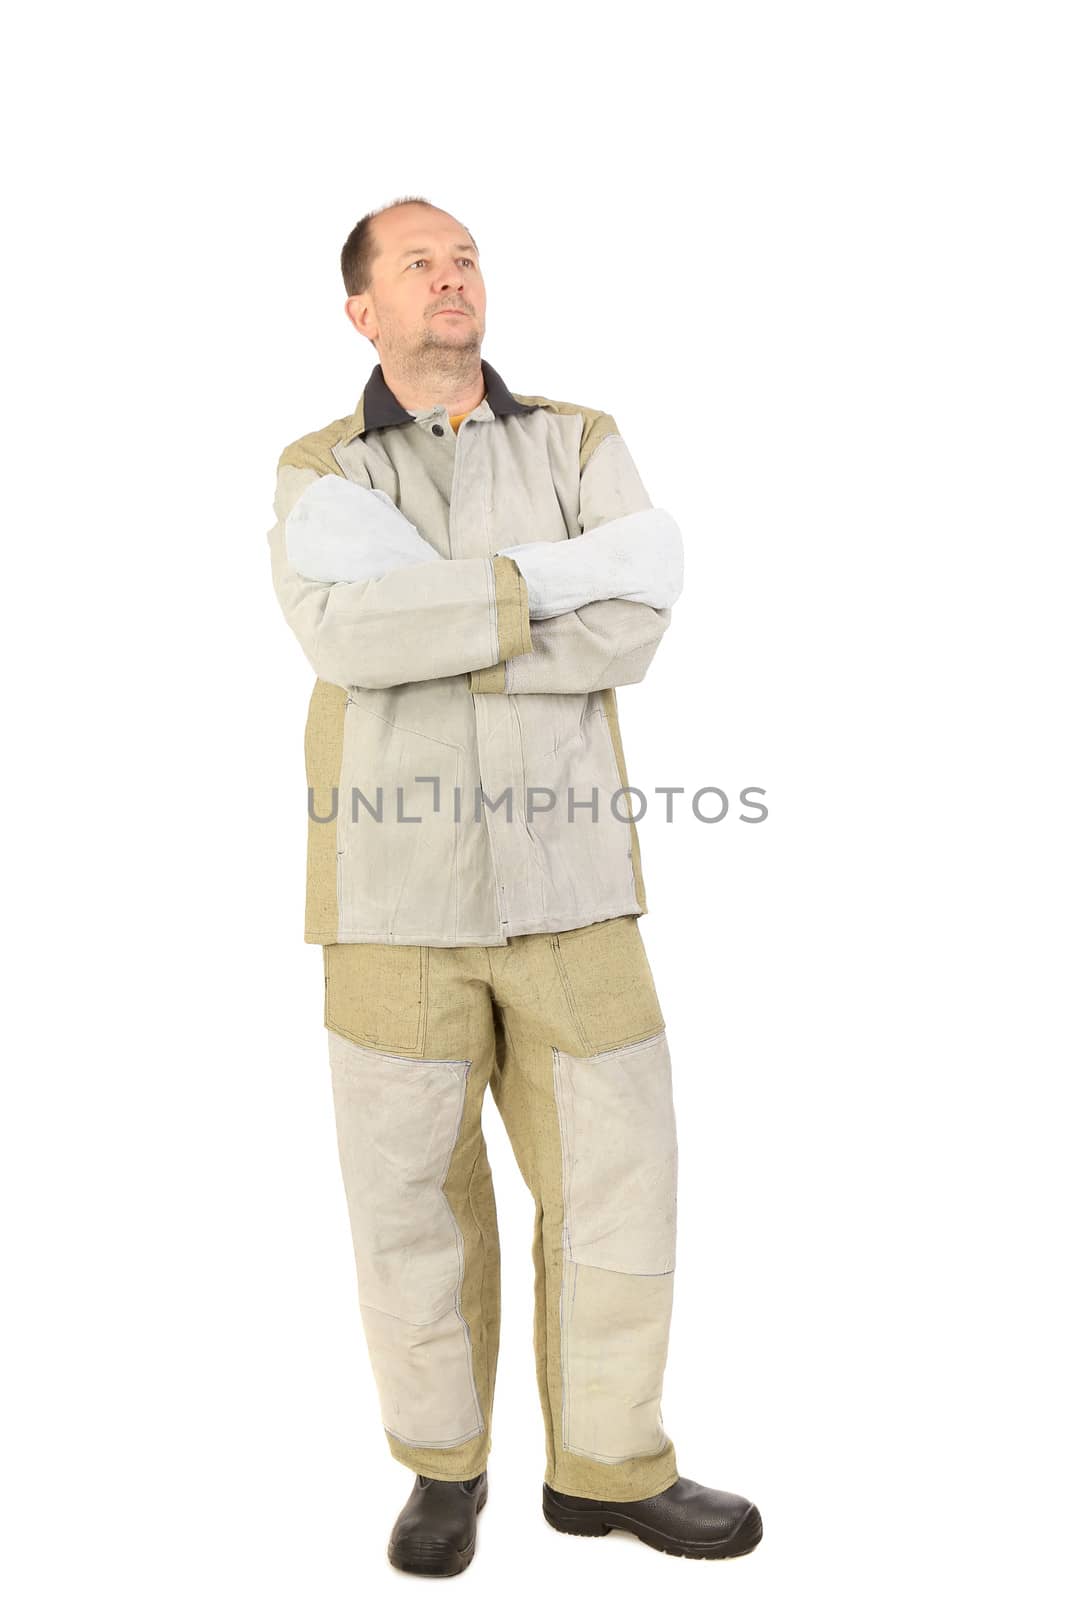 Men in welding clothes. Isolated on white background.